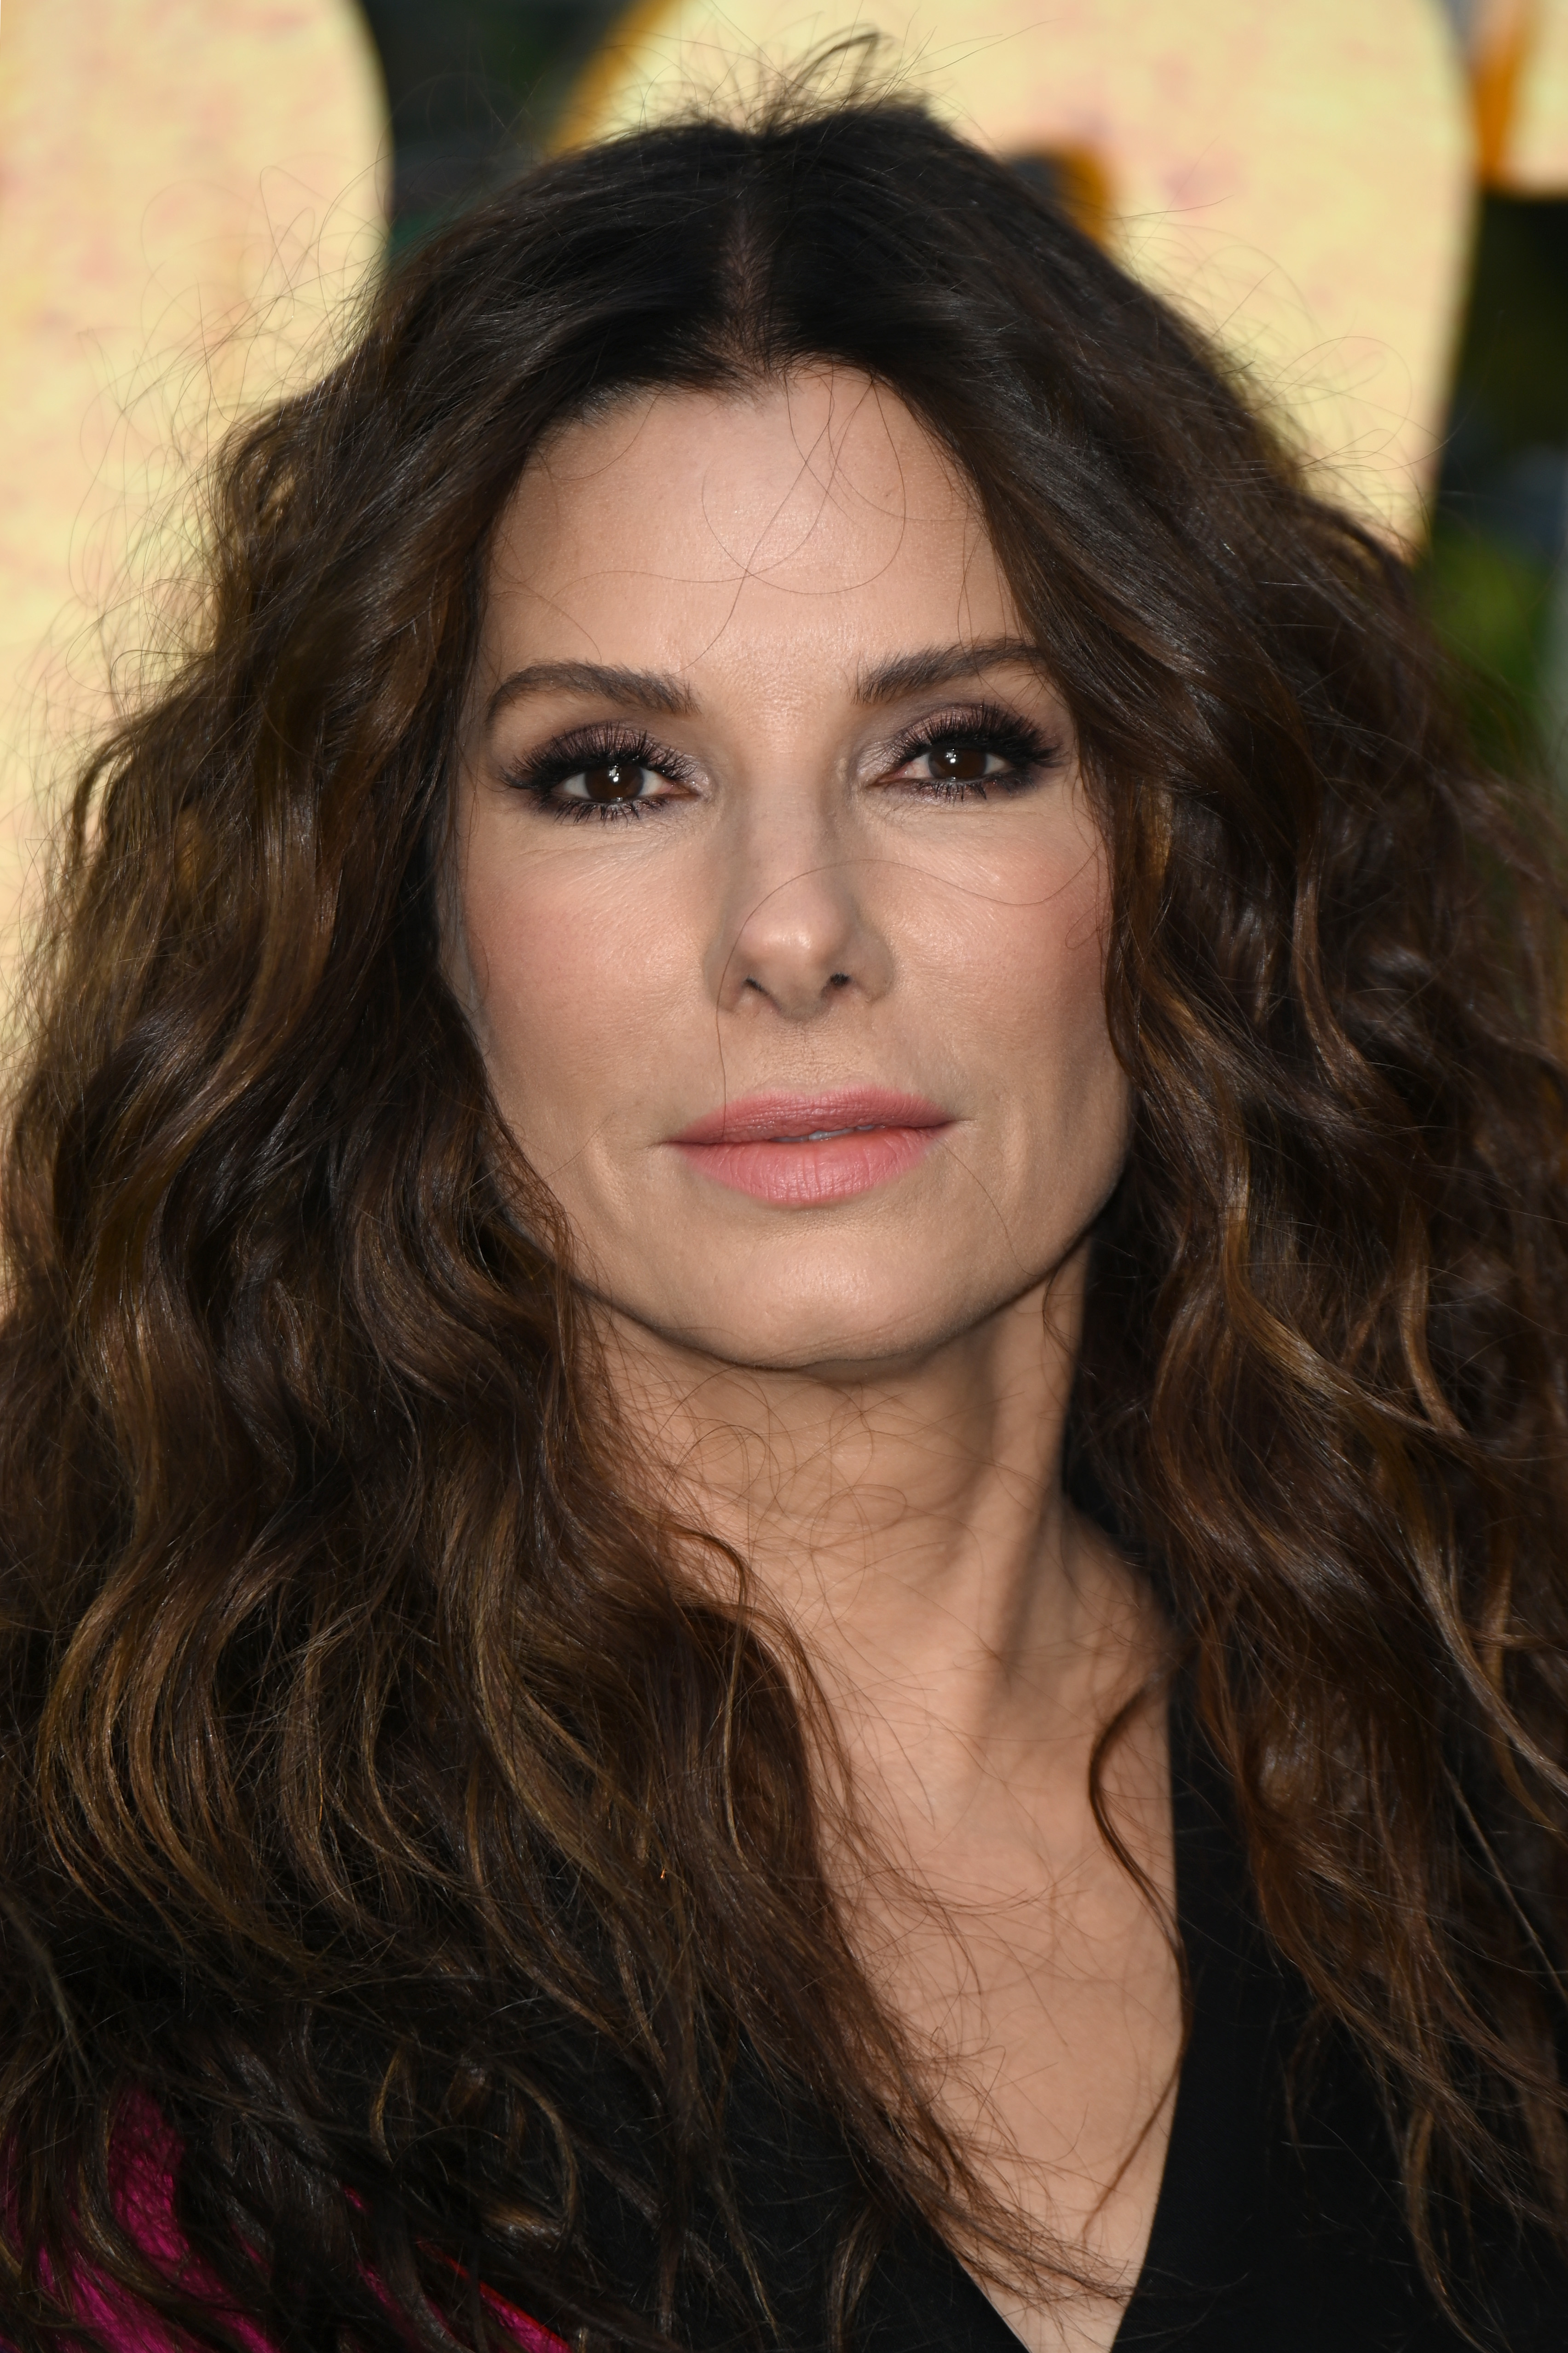 Sandra Bullock at "The Lost City" UK screening on March 31, 2022, in London, England. | Source: Getty Images